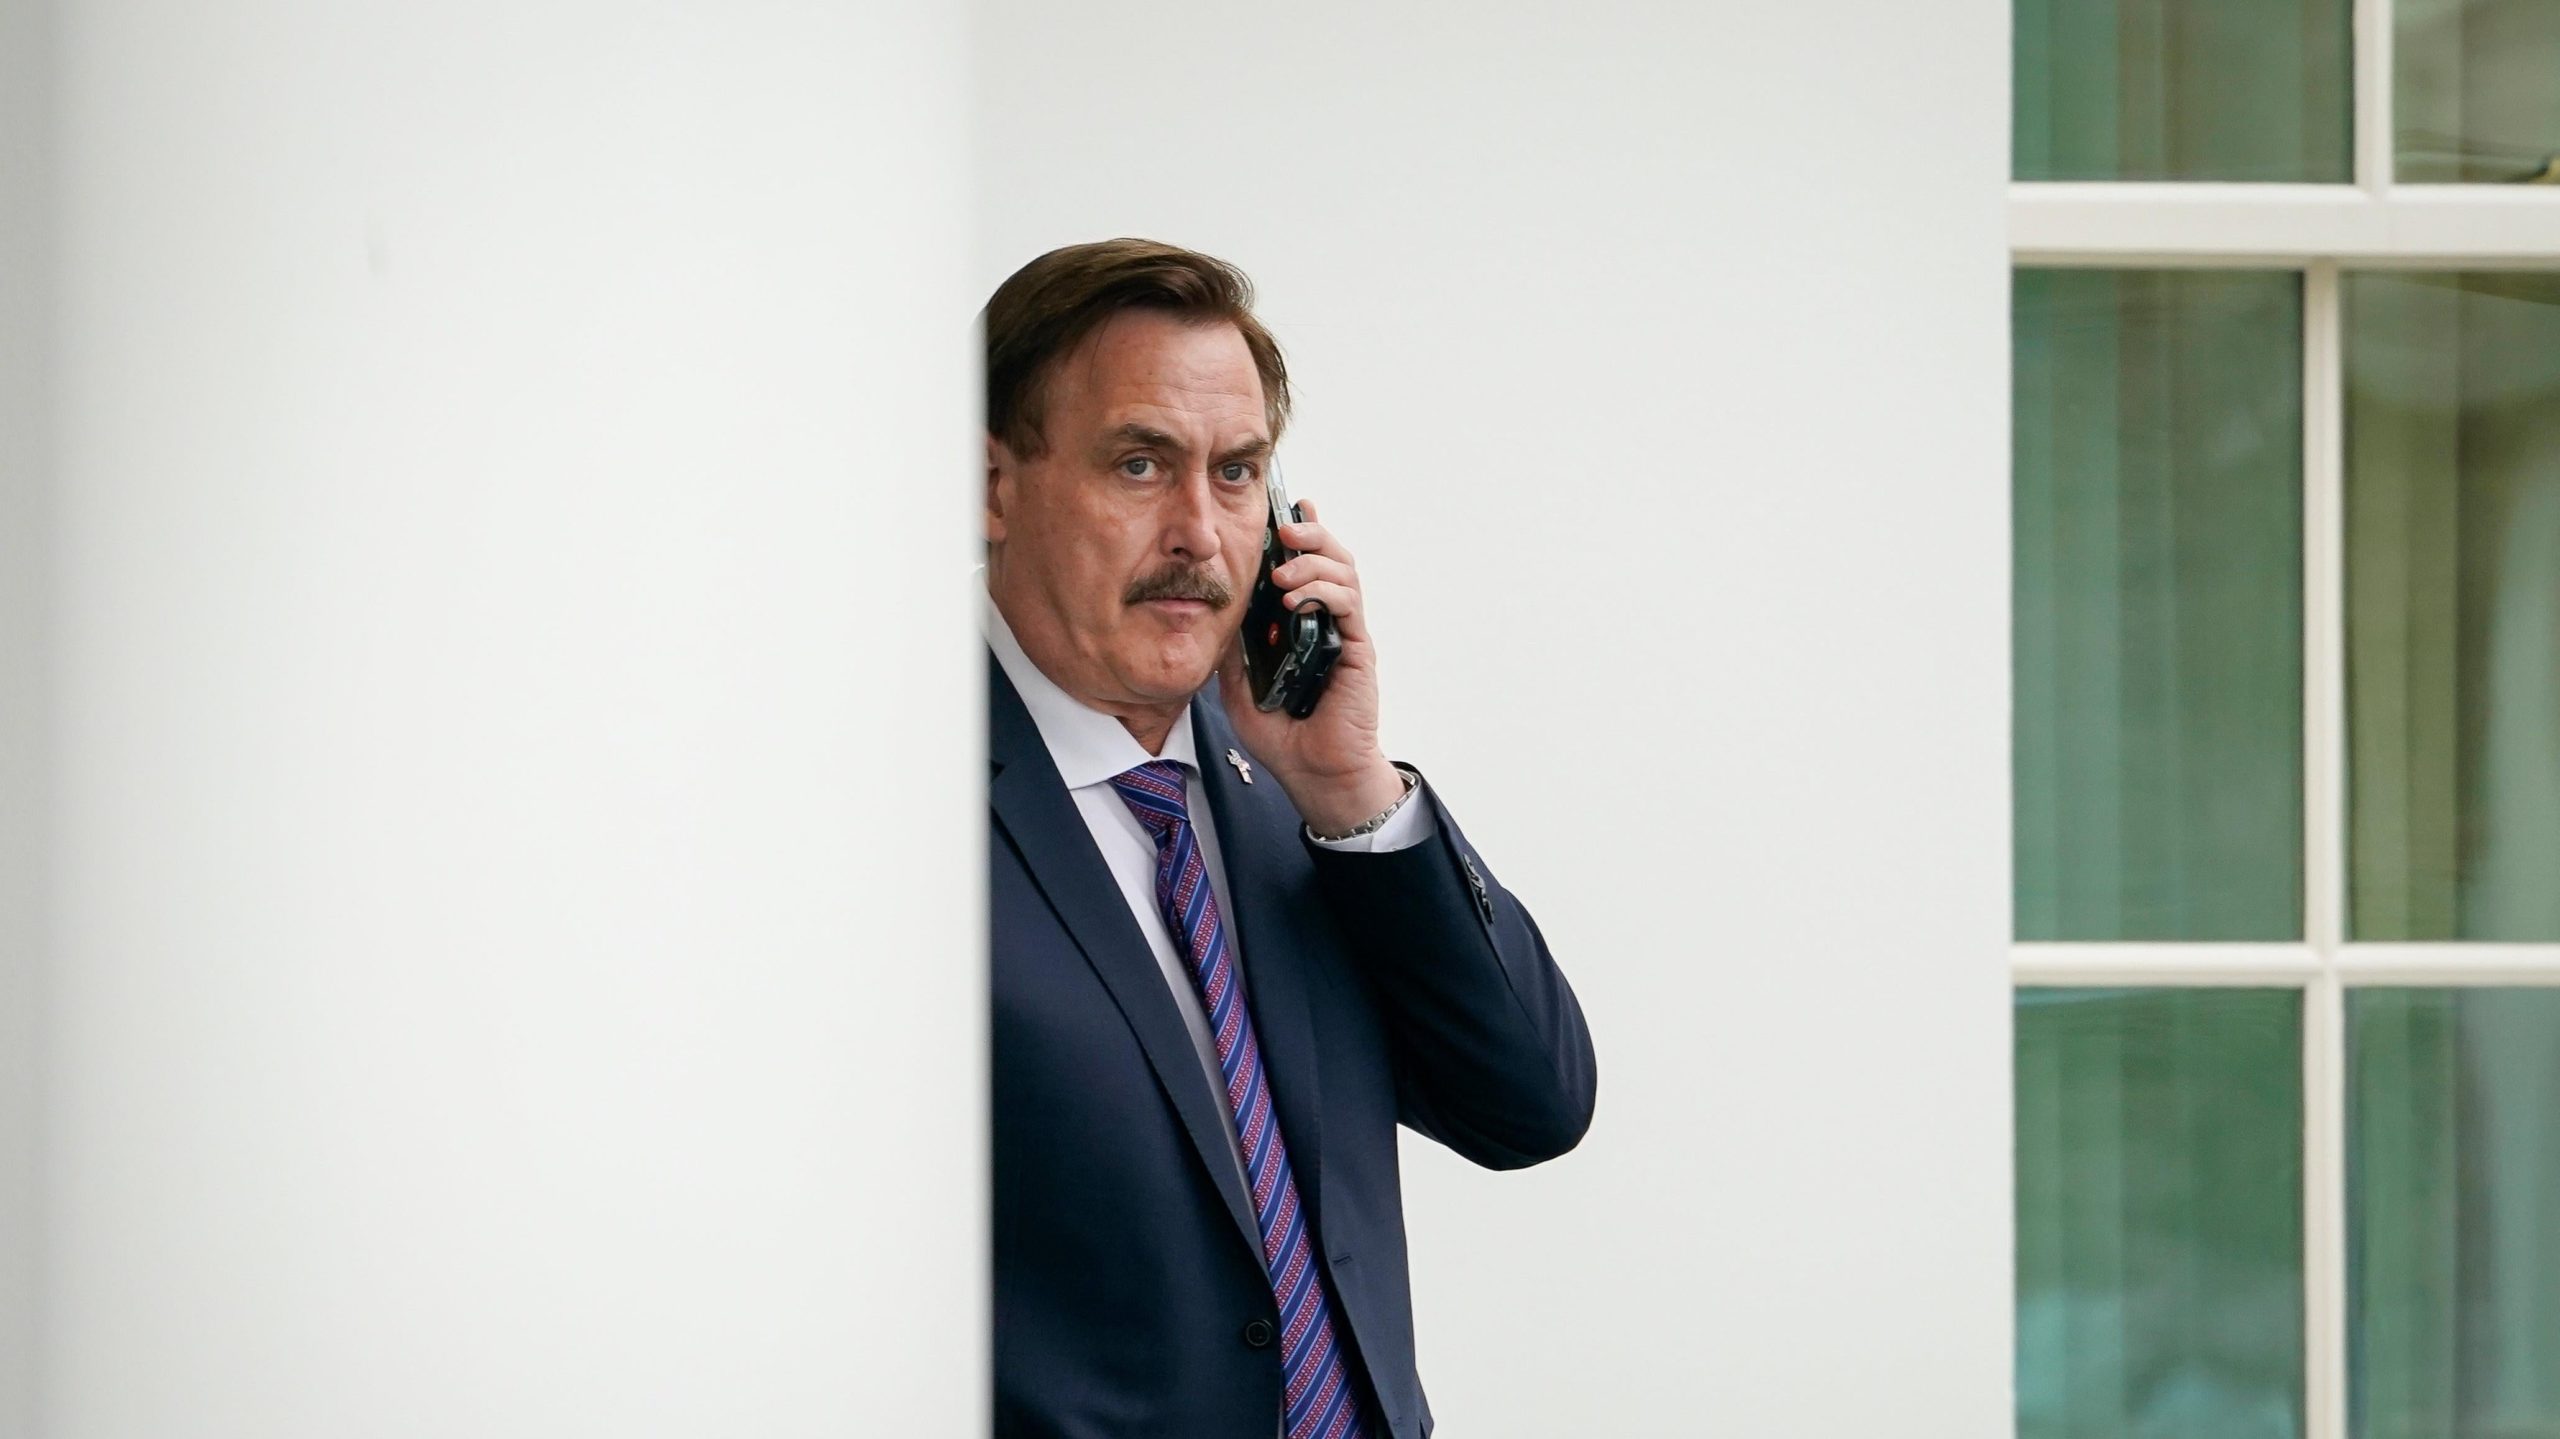 MyPillow gremlin Mike Lindell outside the White House on Jan. 15, 2021. (Photo: Drew Angerer, Getty Images)